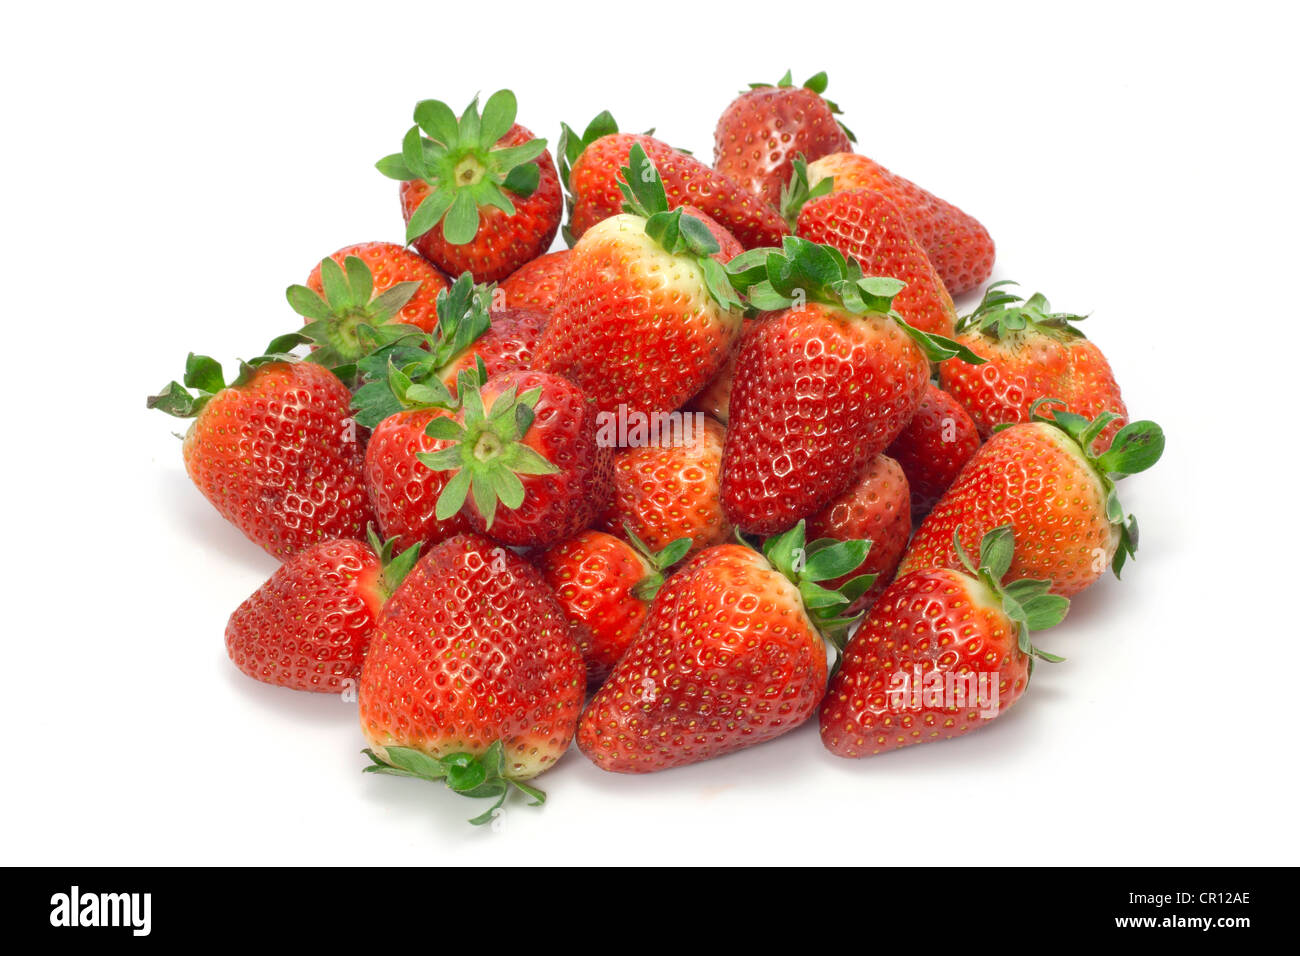 Heap of strawberries on white background Stock Photo